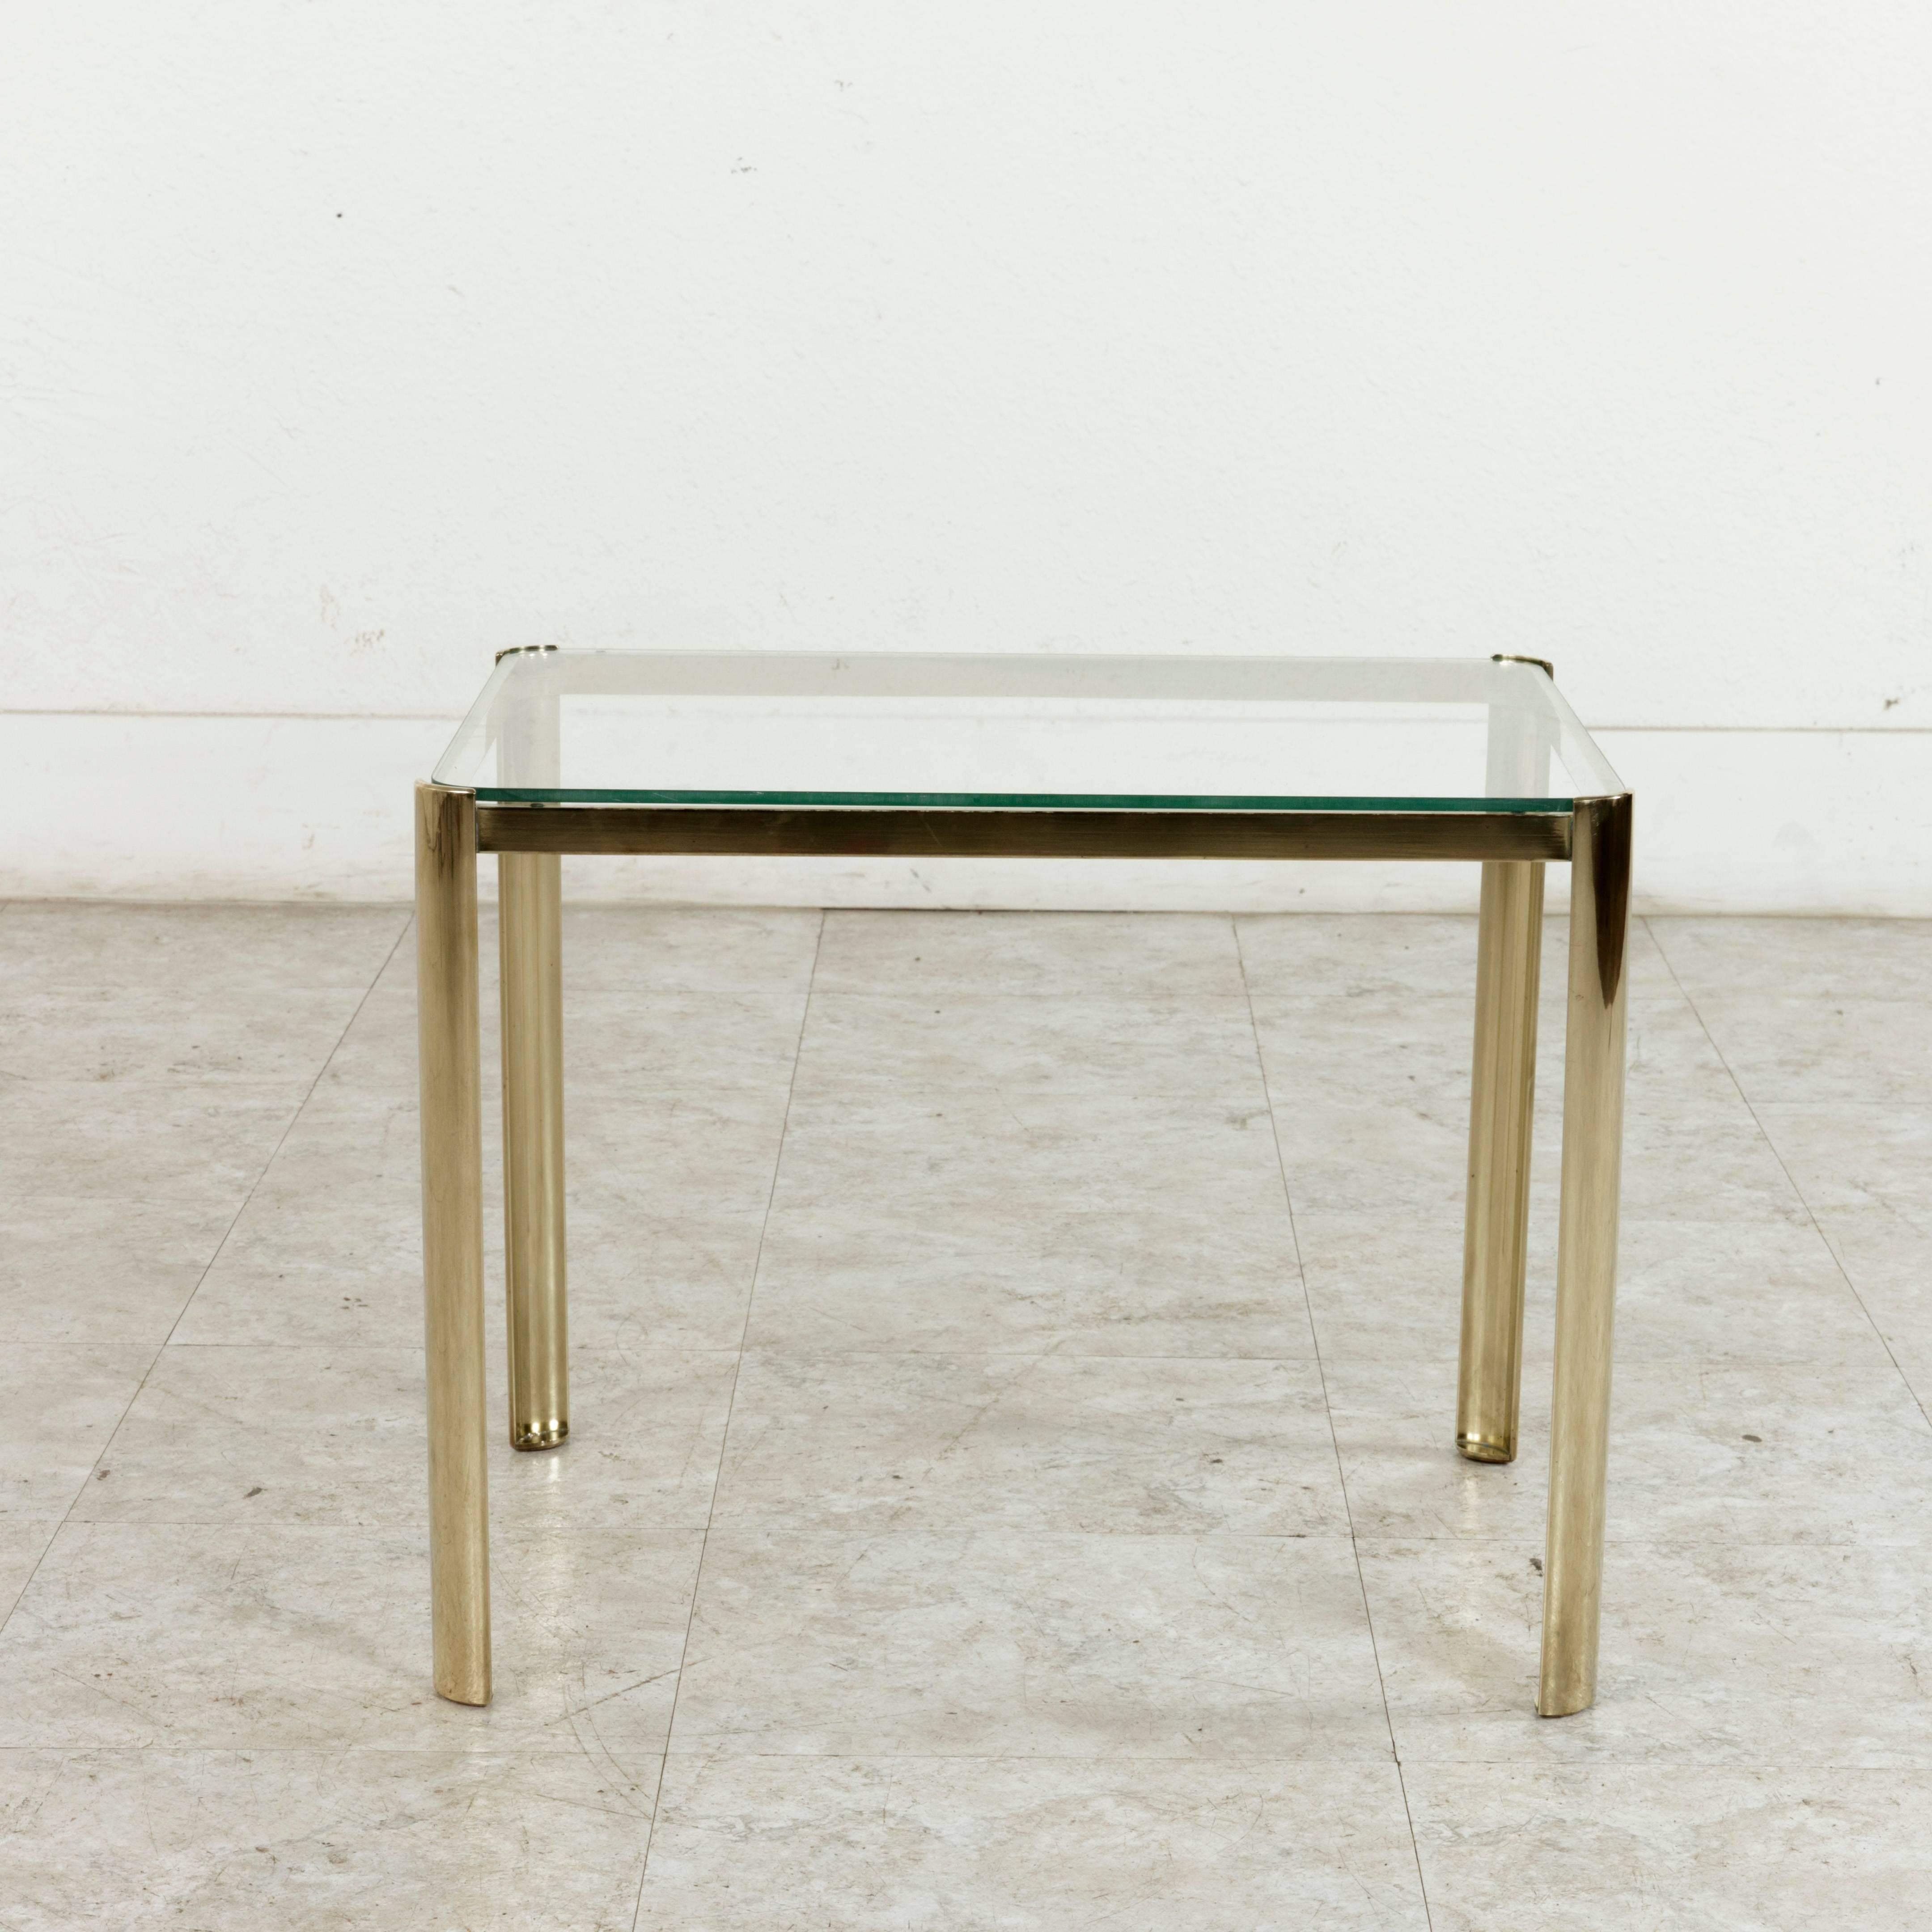 Midcentury French Bronze and Glass Side Table by Jacques Quinet for Broncz 1